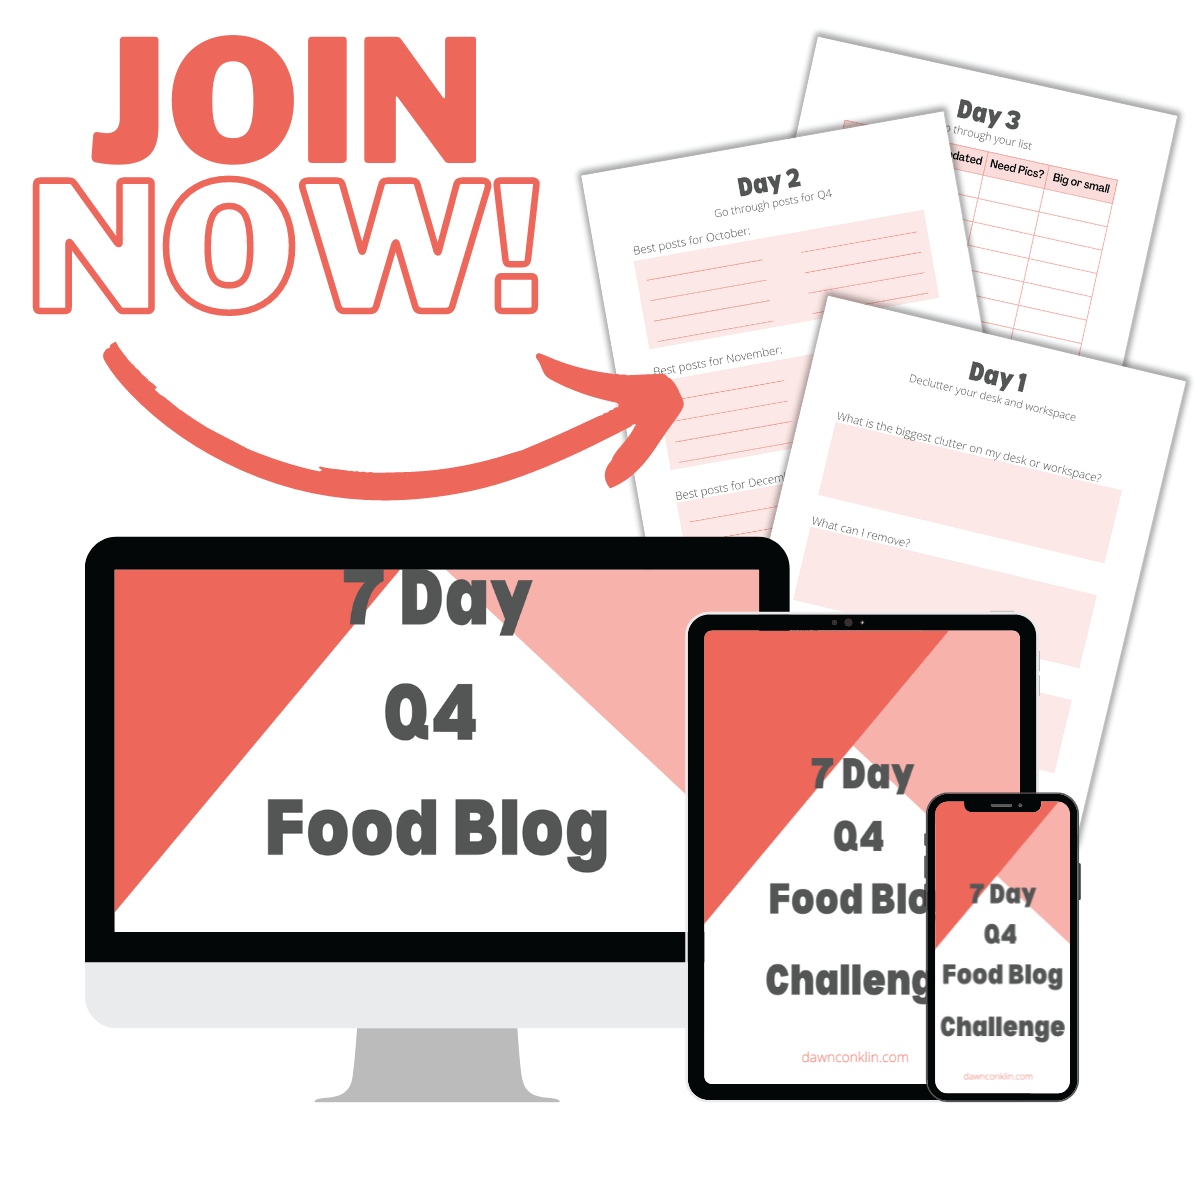 Join now 7 day Q4 food blog challenge with 3 of the workbook pages shown.